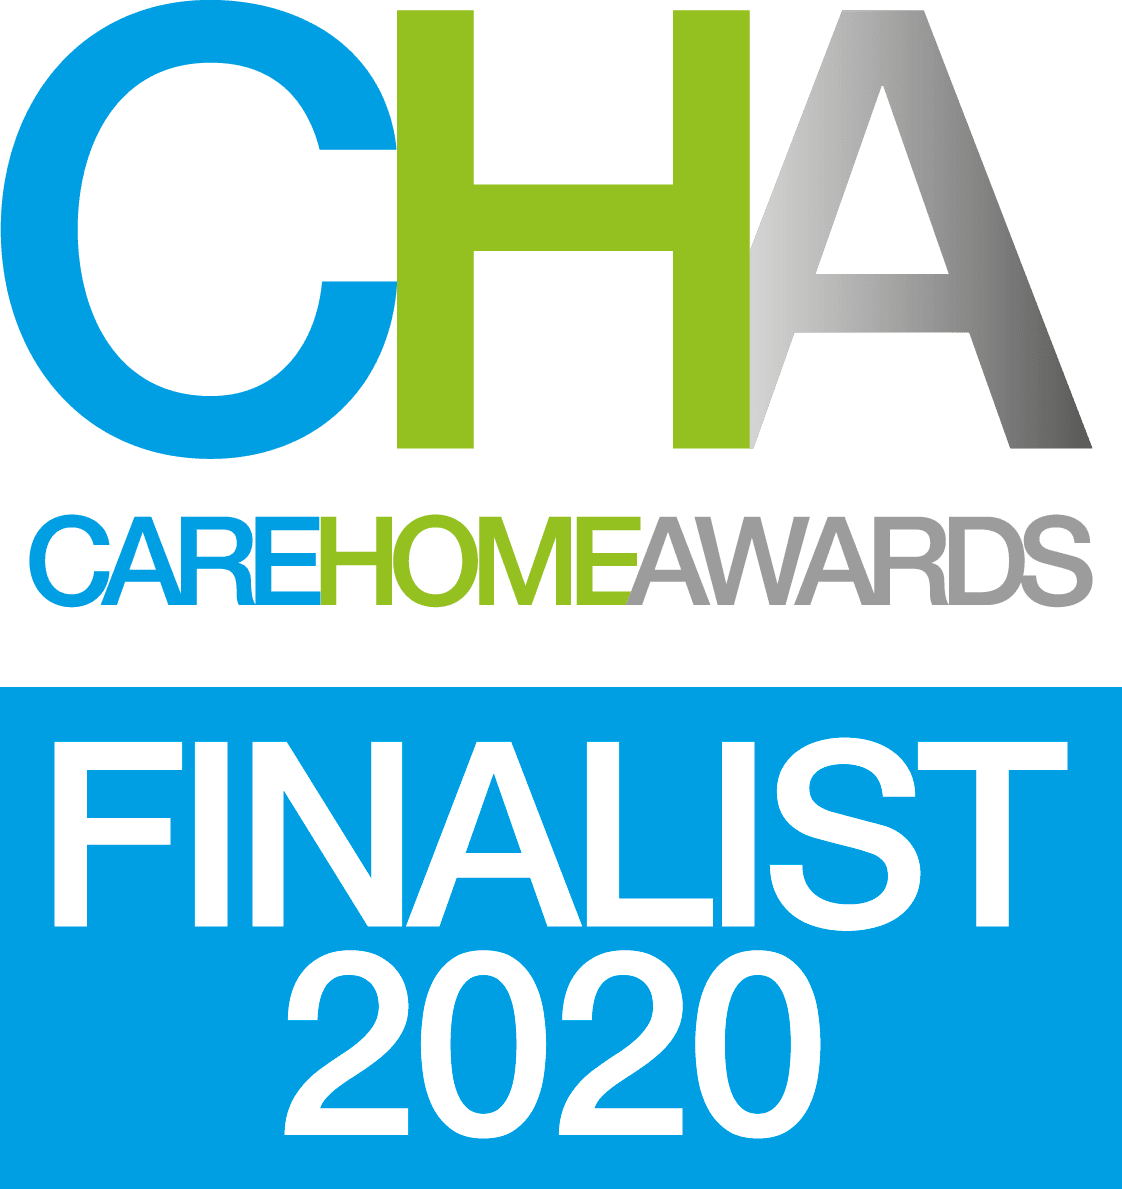 Care Home Awards 2020 - Finalist